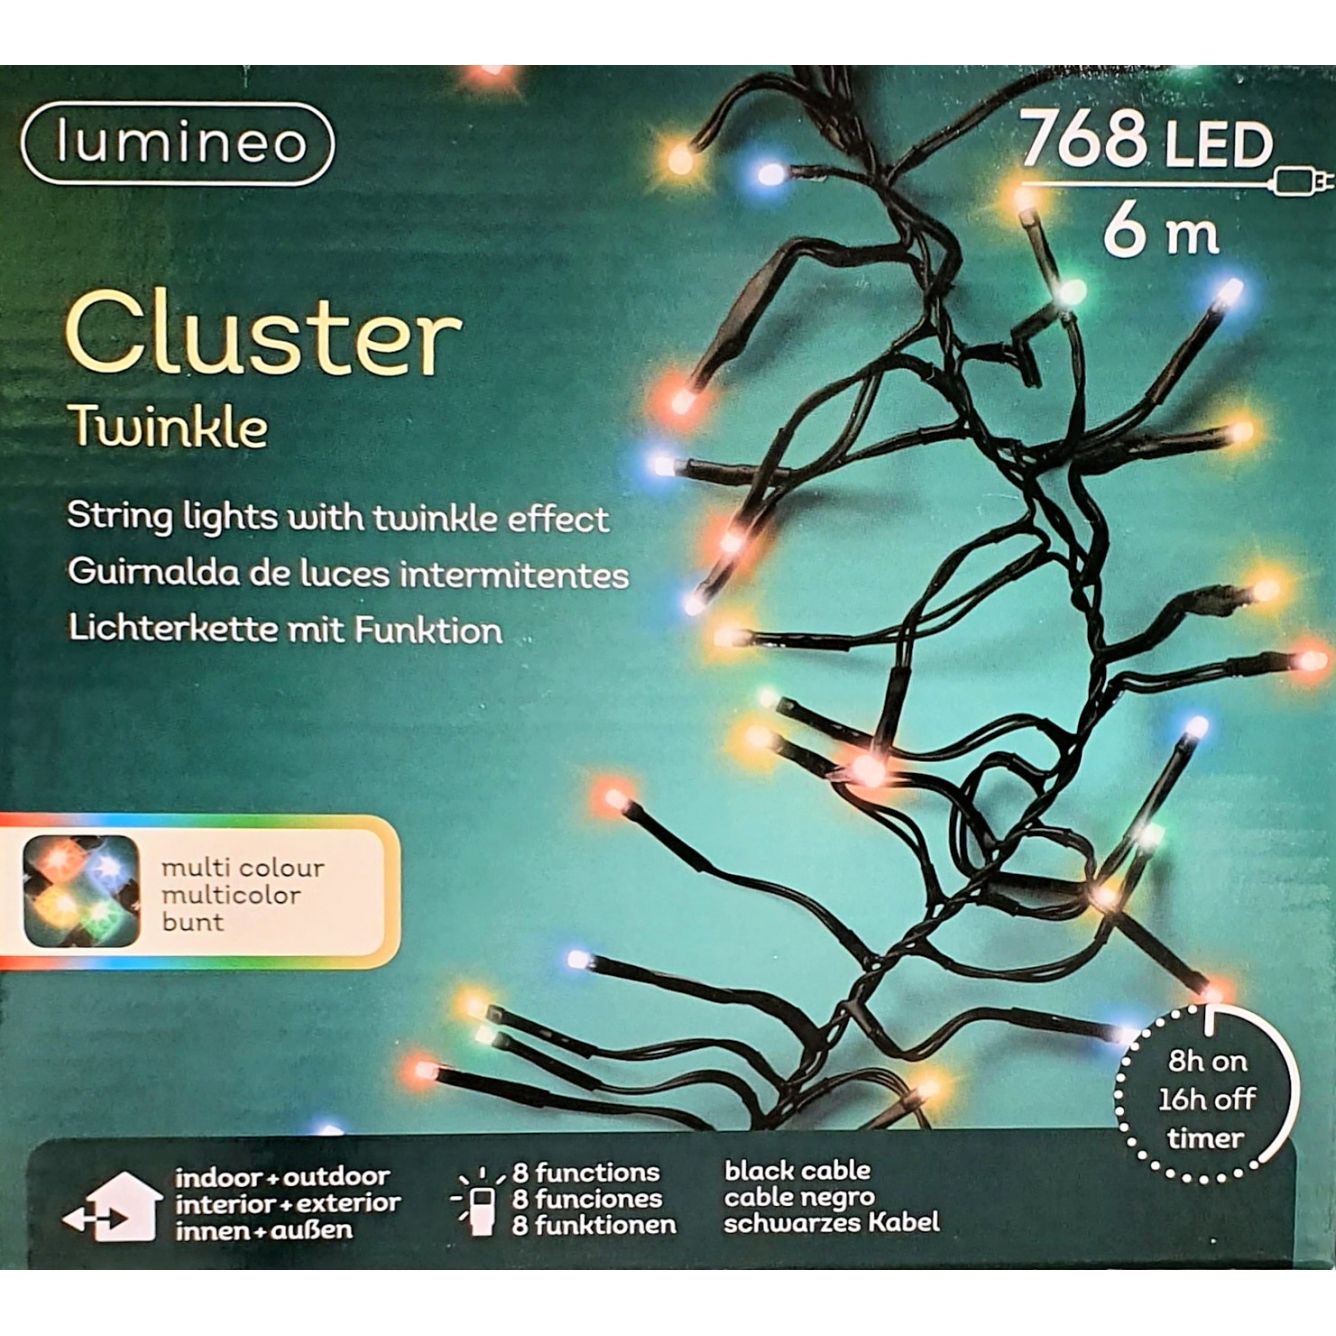 Clusterverlichting lumineo 768-lamps.LED Twinkle multi/zwart; timer; 5m lead